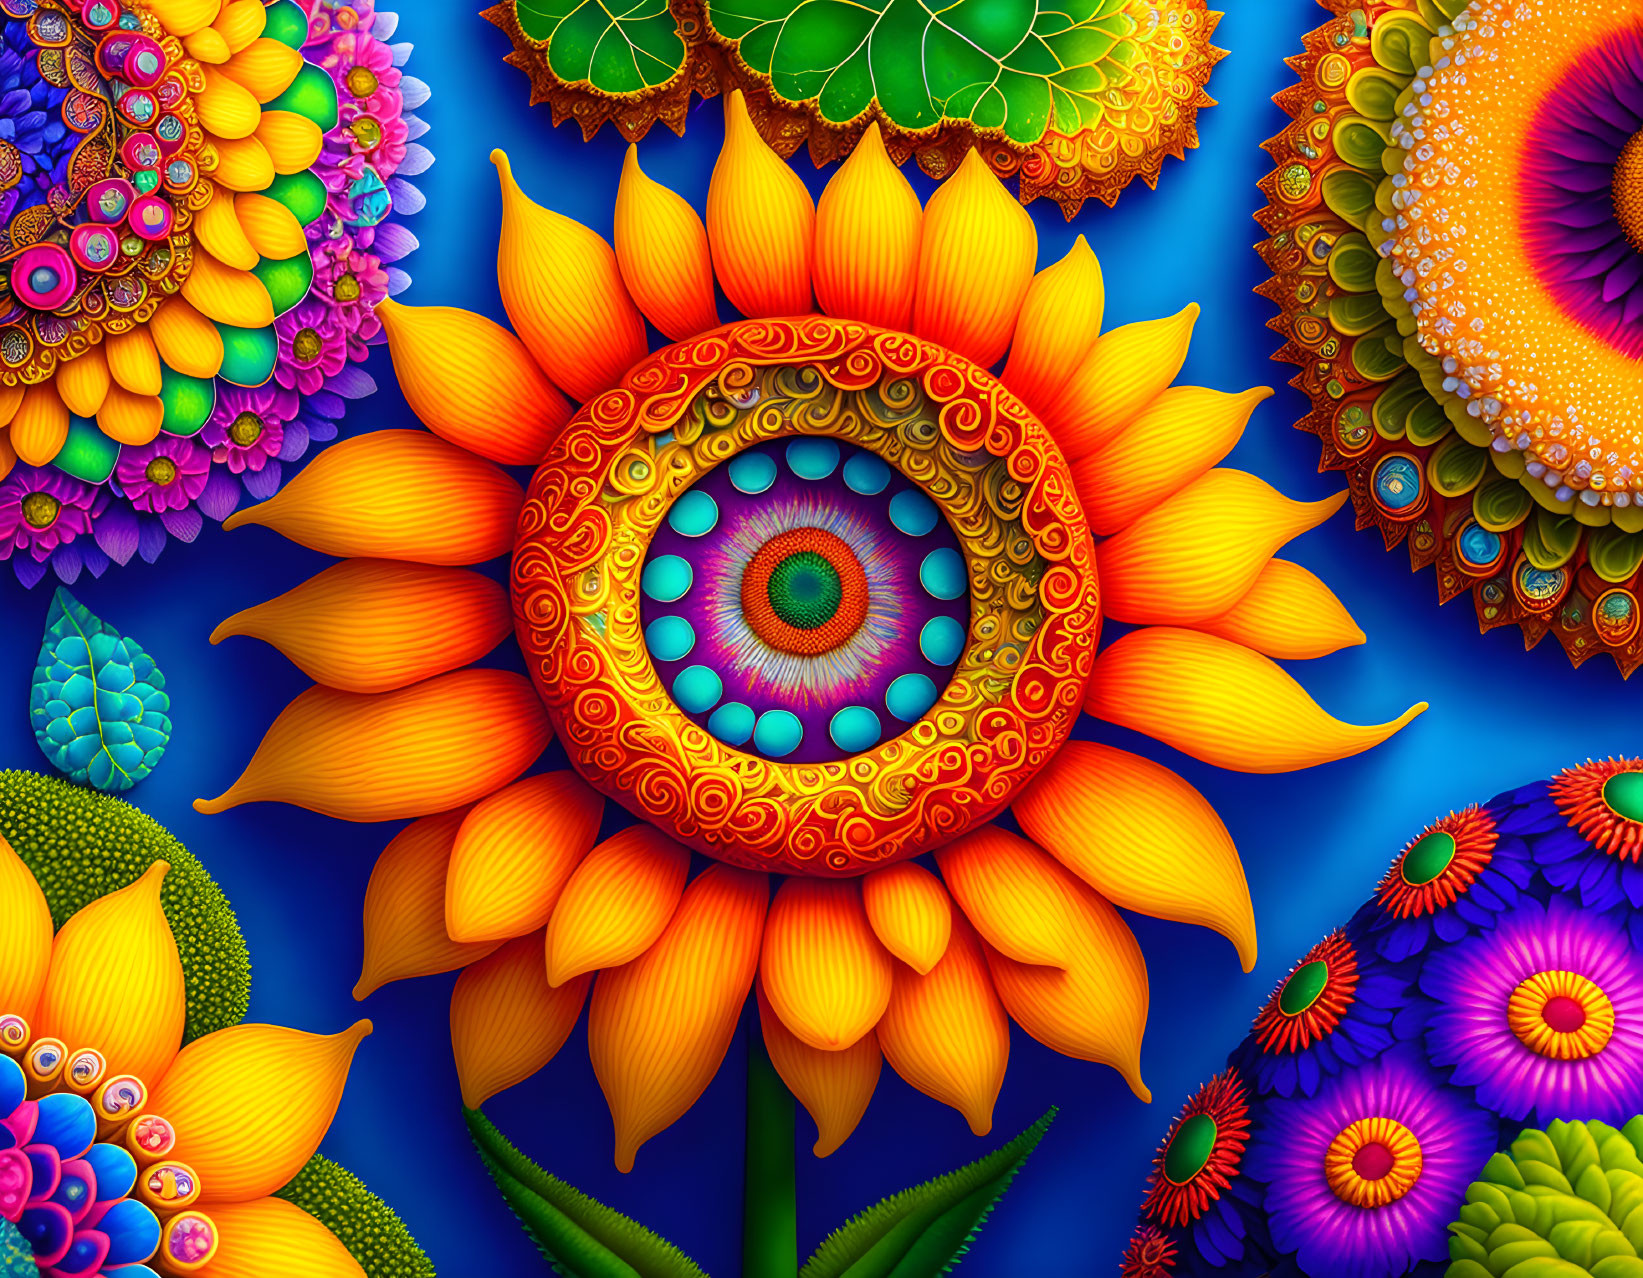 Colorful digital artwork: Stylized sunflower with intricate eye pattern surrounded by vivid flowers.